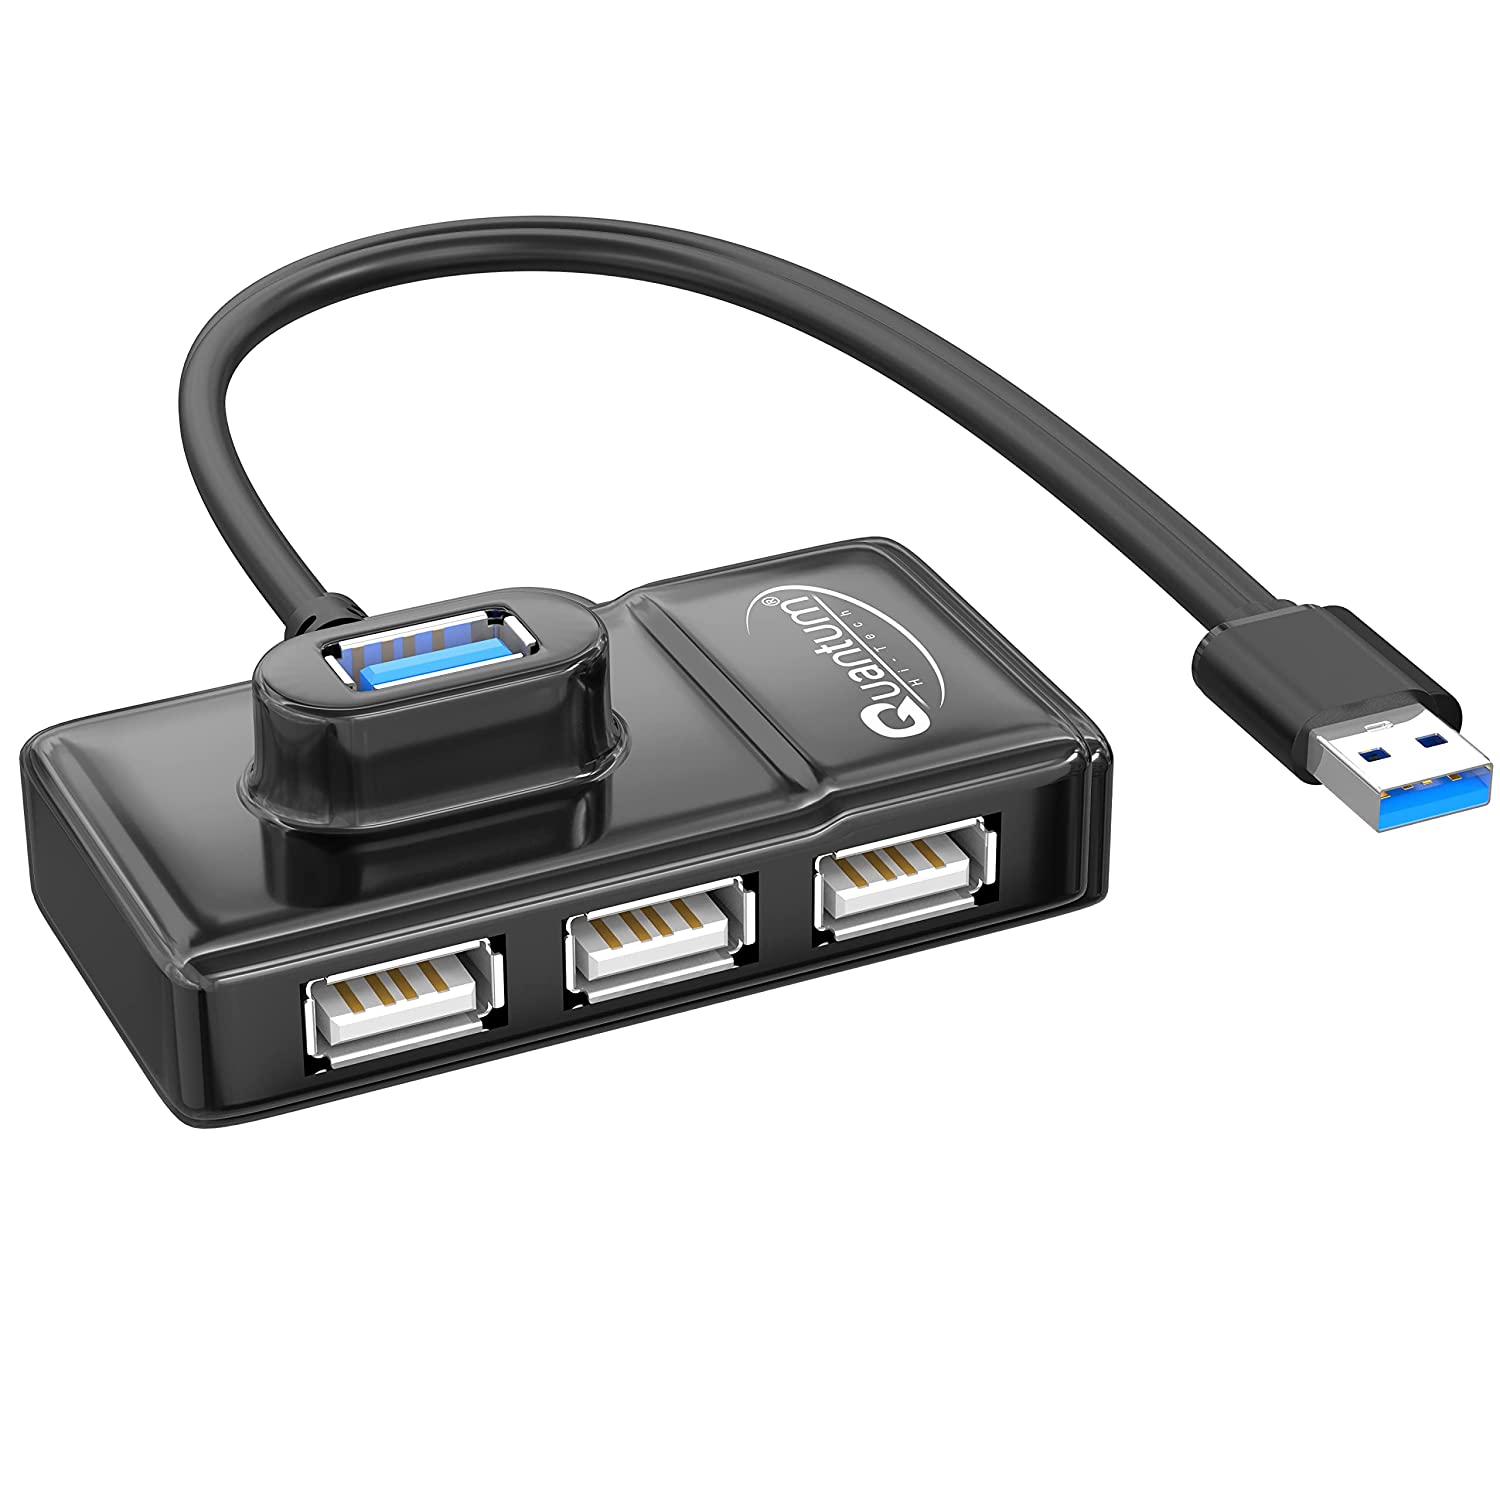 Quantum 4 Port USB Hub (1 Port 3.0 & 3 Port 2.0) with High Speed Data Transfer, Plug Play Usage, Compatible with Laptop, PC and Other USB-A Devices, QHM7532 (Black)-USB HUB-dealsplant